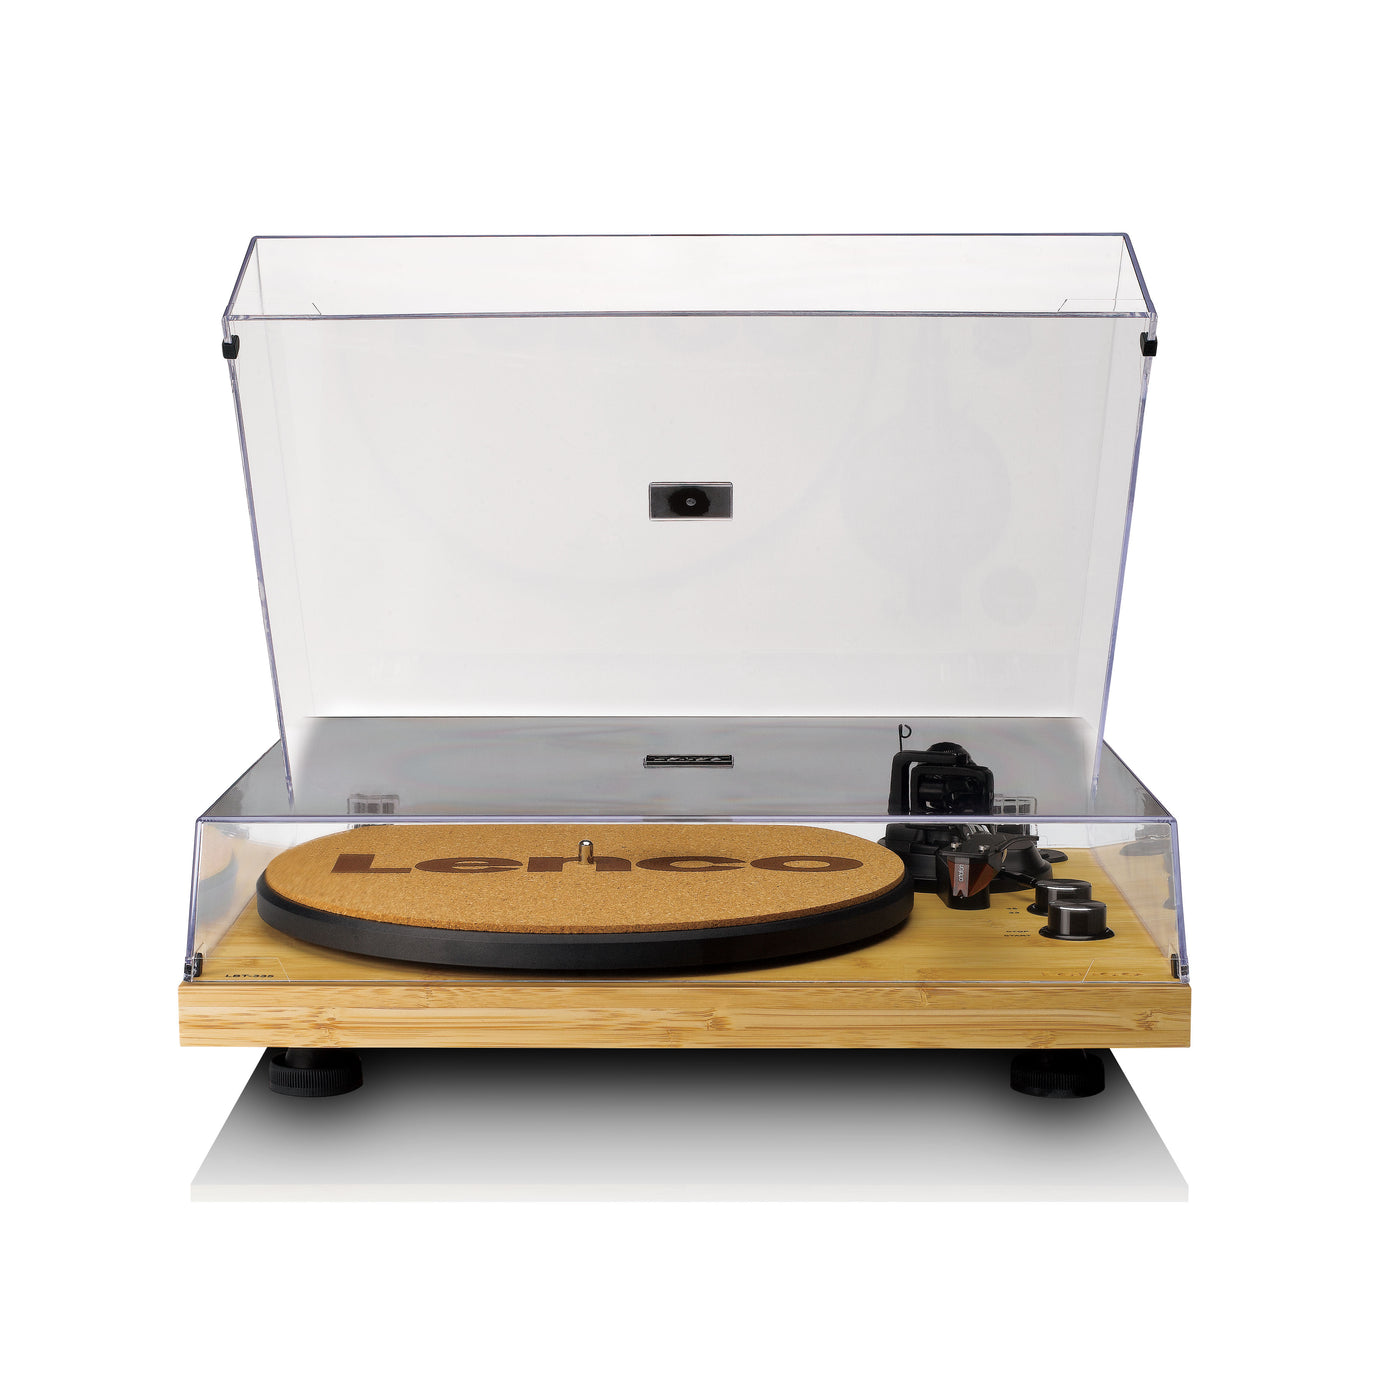 LENCO LBT-335BA - Turntable with Bluetooth®, bamboo housing, and Ortofon 2M Red cartridge